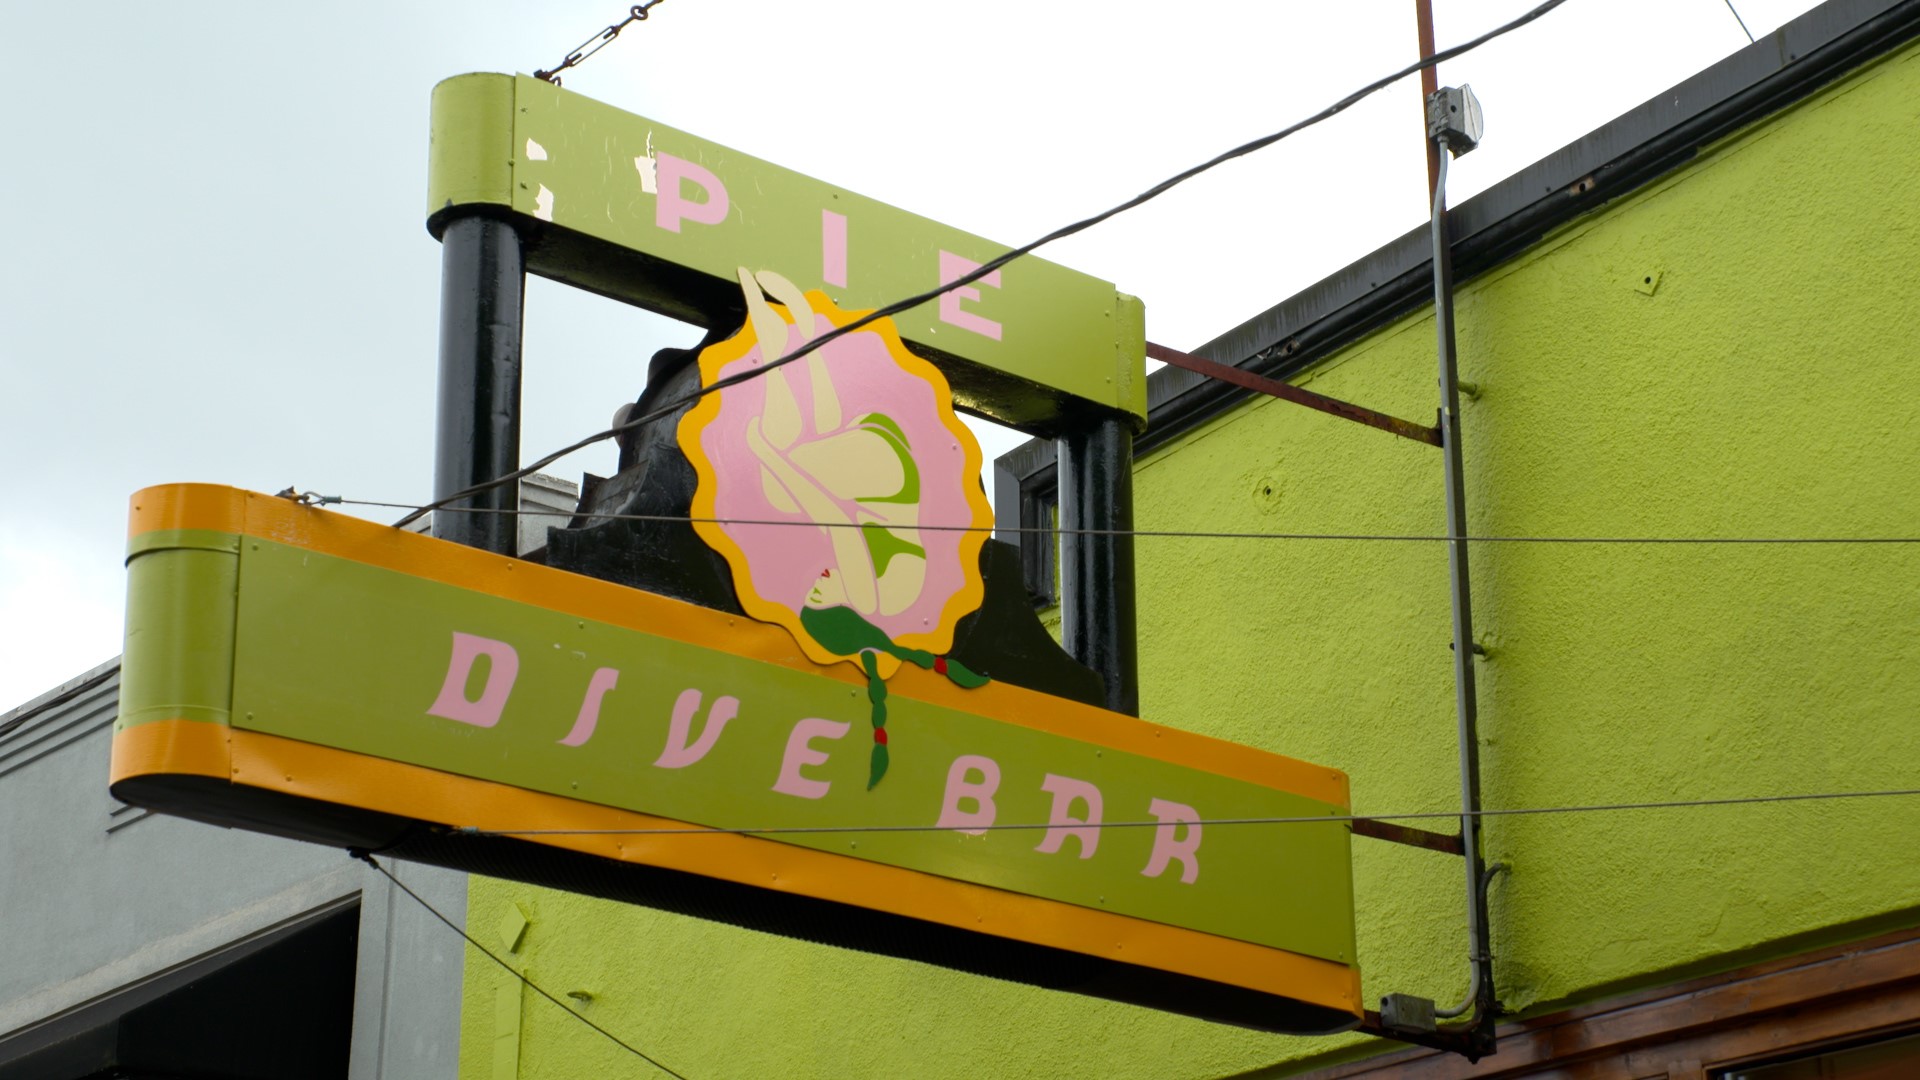 Pie Dive Bar is the place for drinks and pie! 🥧#k5evening